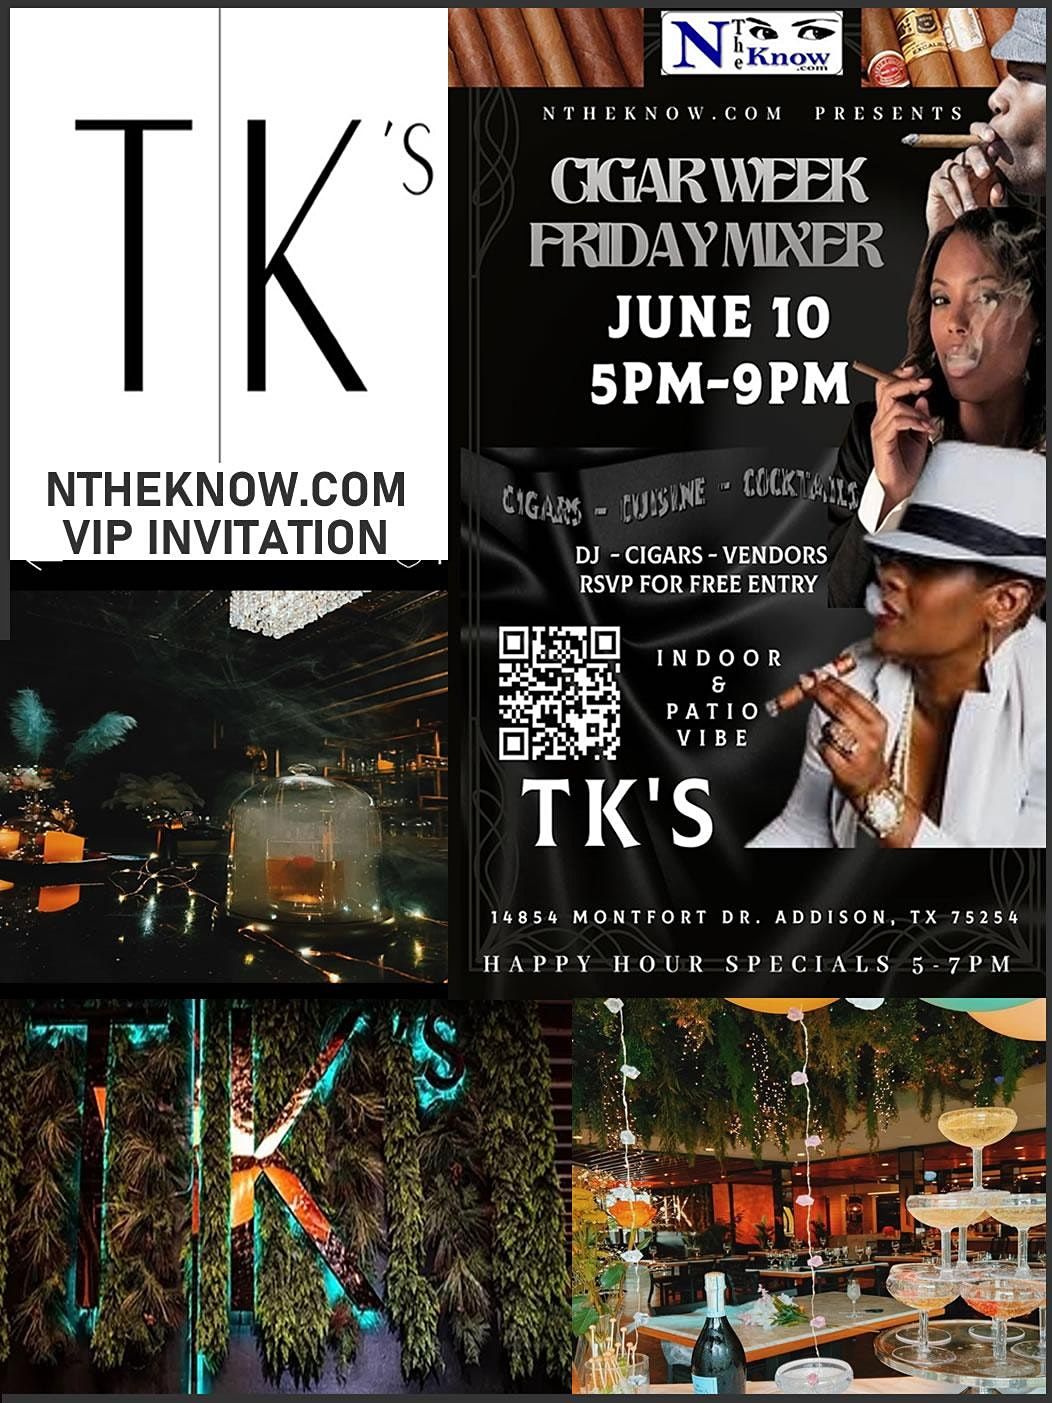 NTheknow.com Presents The Cigar Week Mixer June 10@ TK's in Addision